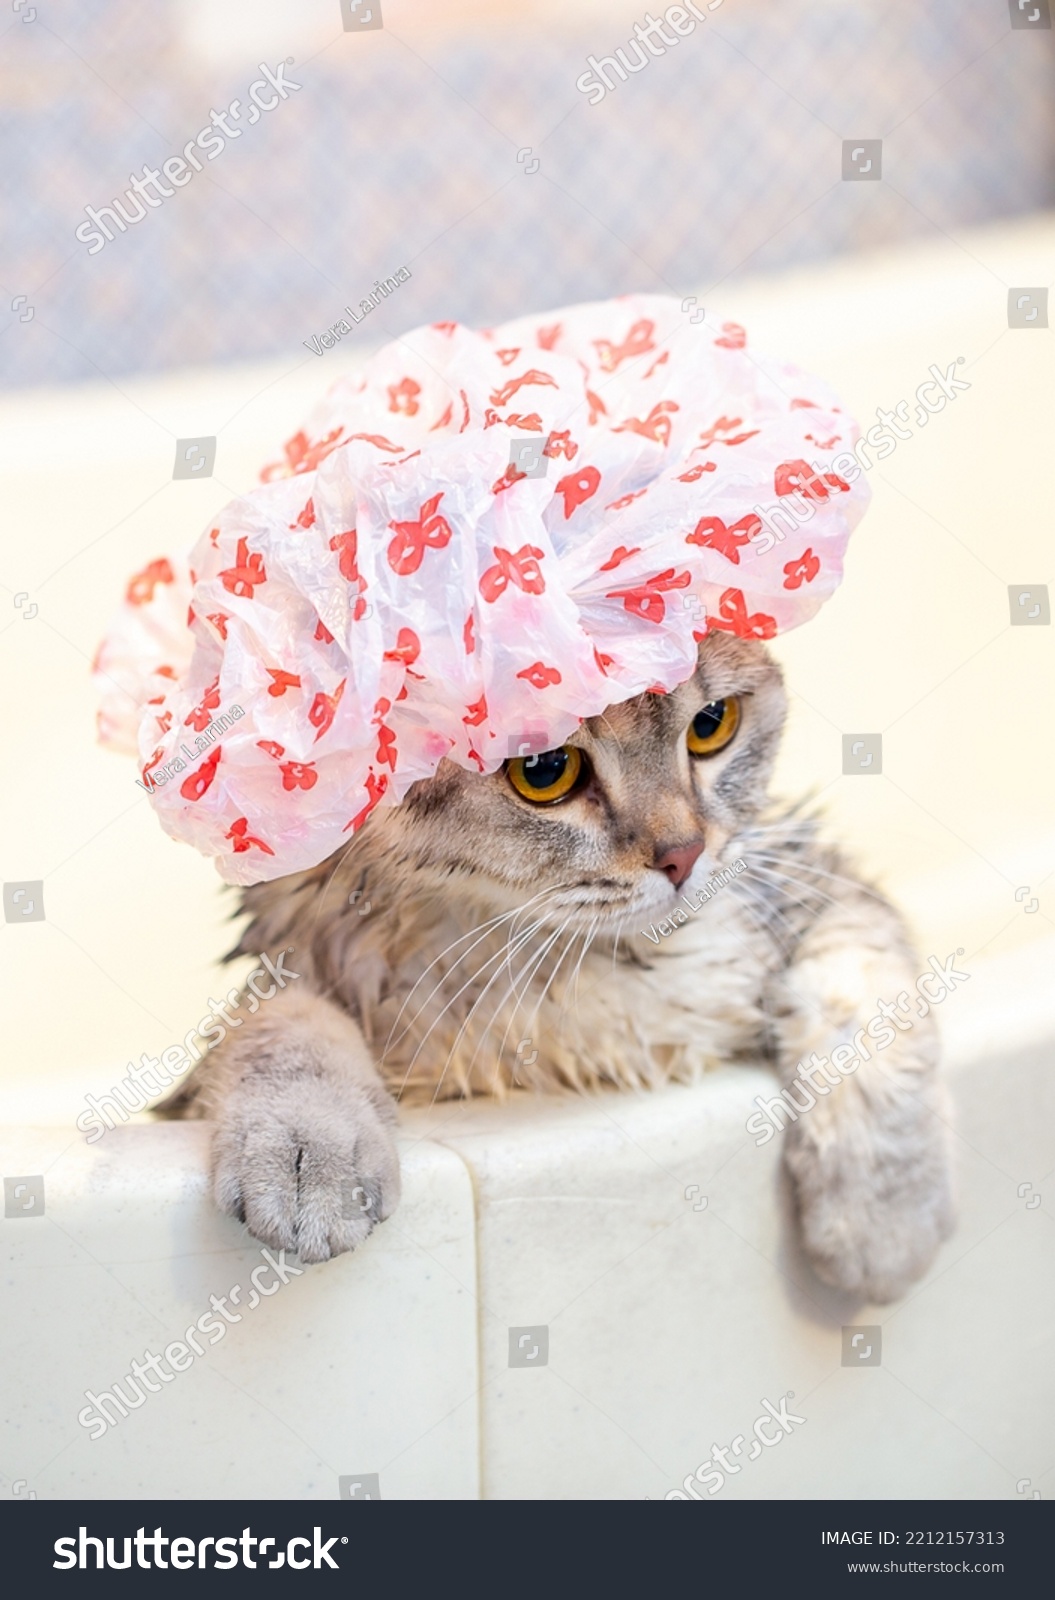 Bathing animals, grooming, combing, drying and styling cats, combing wool. A beautiful British cat in a shower cap bathes in the bath. Animal care. Animal care. #2212157313